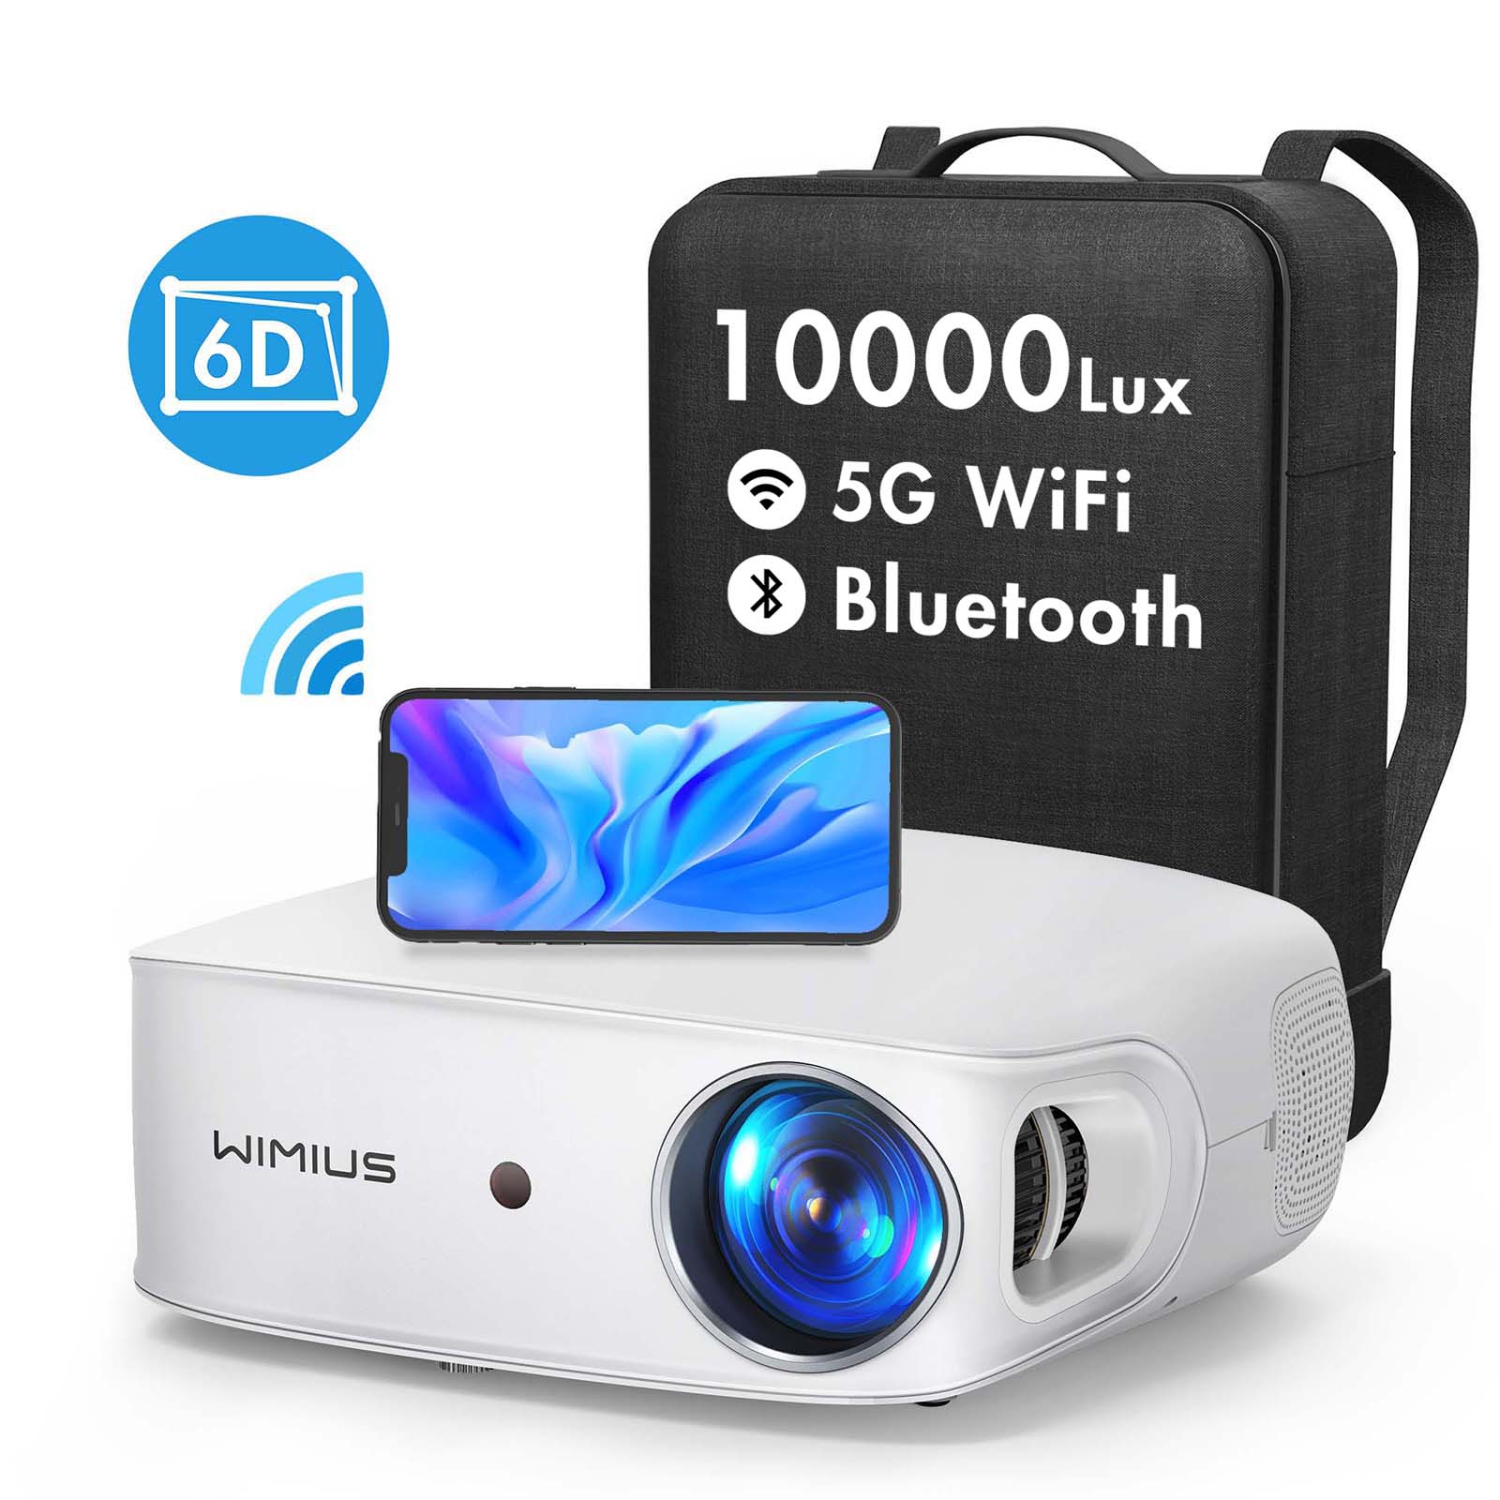 Projectors Savings Clearance! 5G WiFi Bluetooth Projector 6D Auto Keystone Correction Full HD 4K Projector 500 ANSI Lumens Native 1080P Outdoor Projector WiMiUS K7